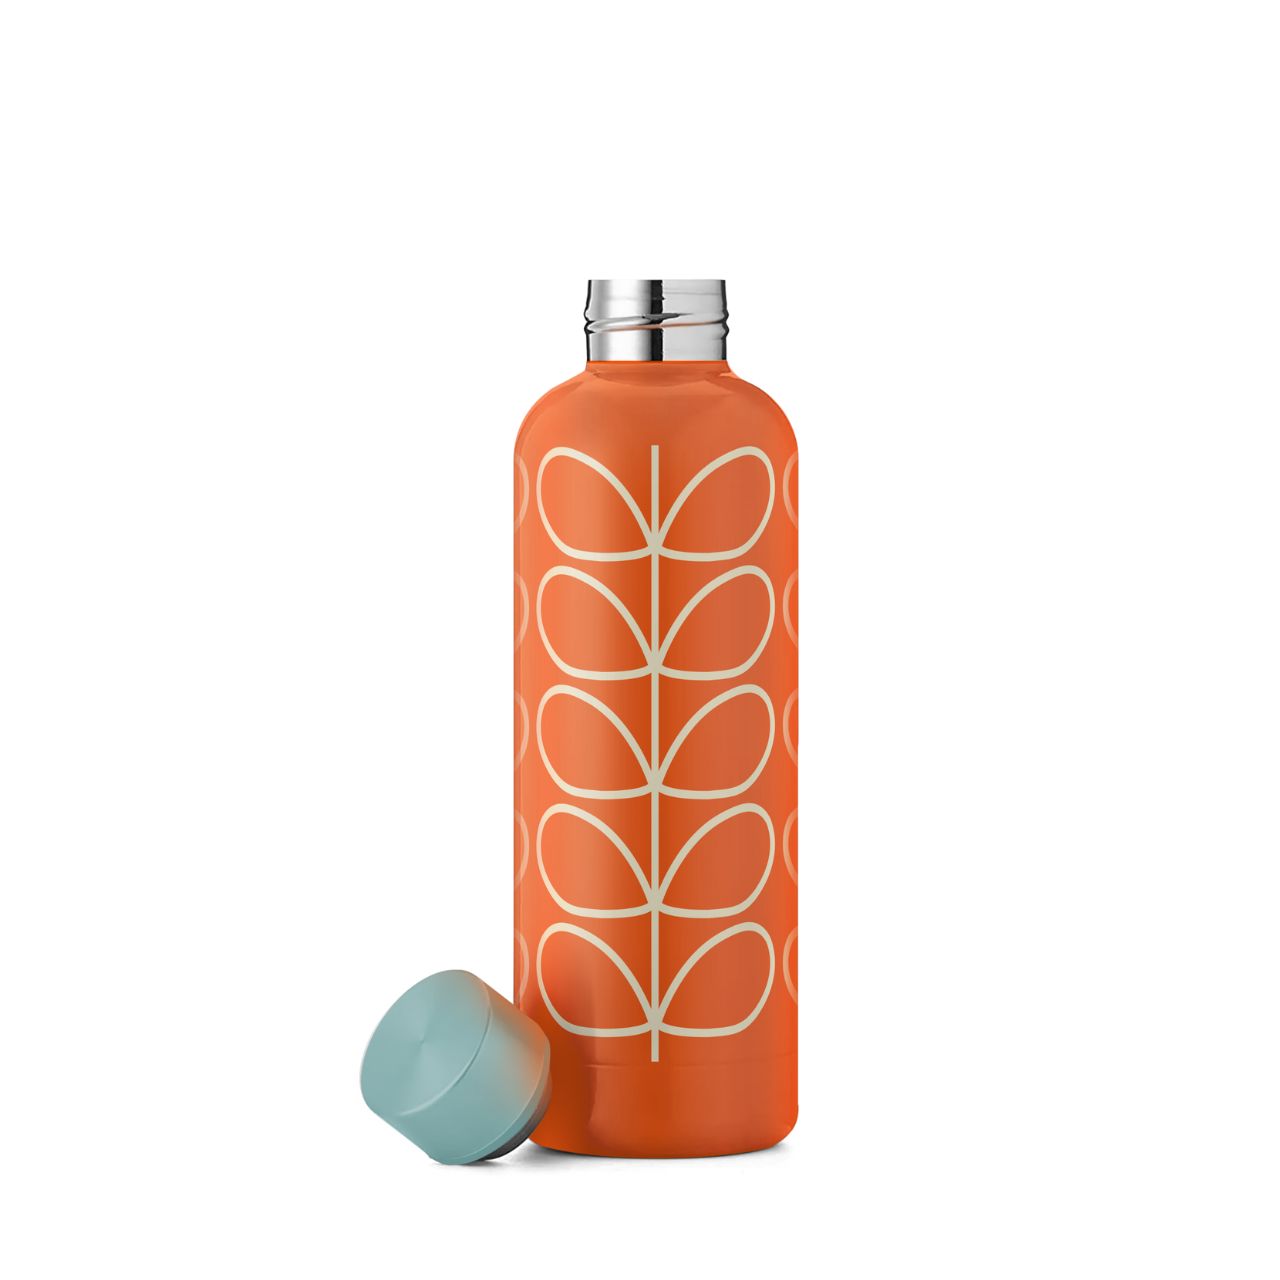 Orla Kiely Linear Stem Orange Stainless Steel Water Bottle  Bring a burst of colour to your home with this water bottle from Orla Kiely.  From one the world's top fashion designers Orla Kiely comes this stainless steel water bottle with one of Orla's iconic patterns "The Linear Stem Orange" pattern.